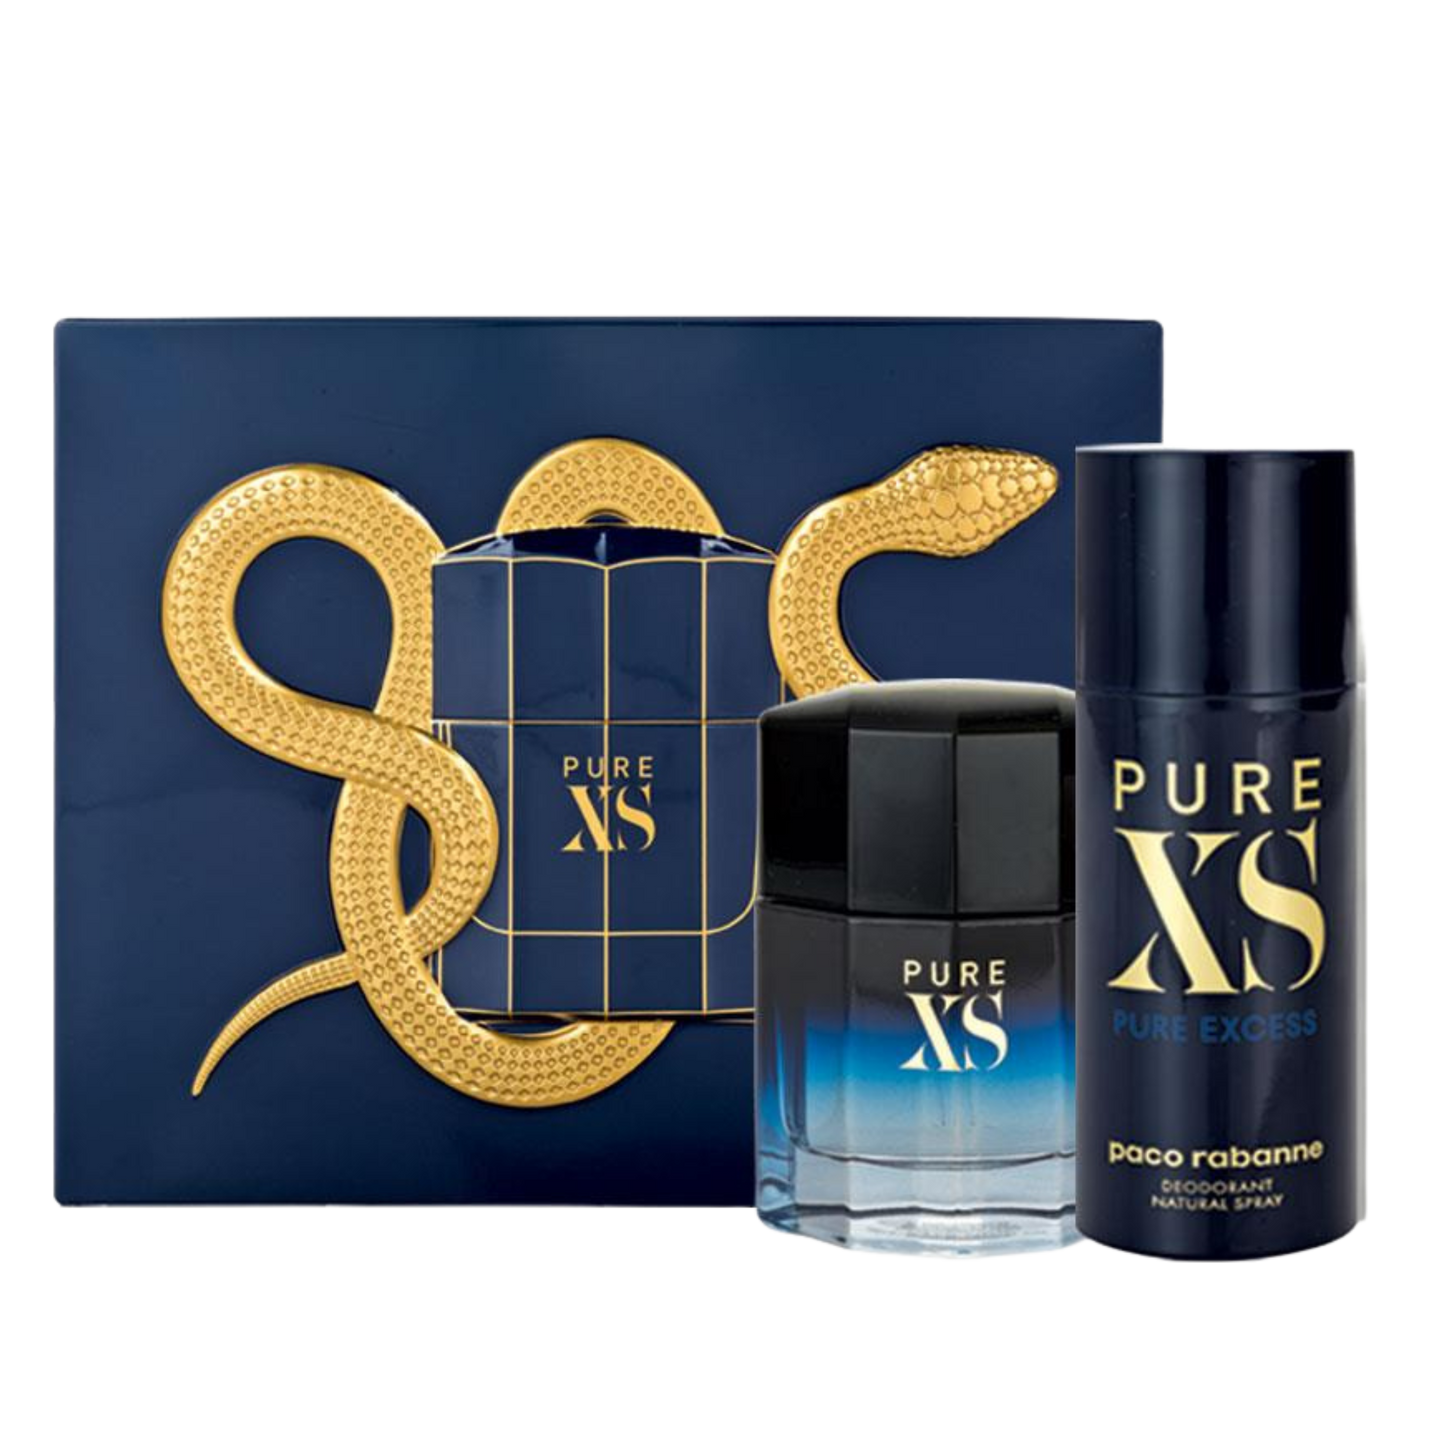 Paco Rabanne Pure Xs Gift Set For Him